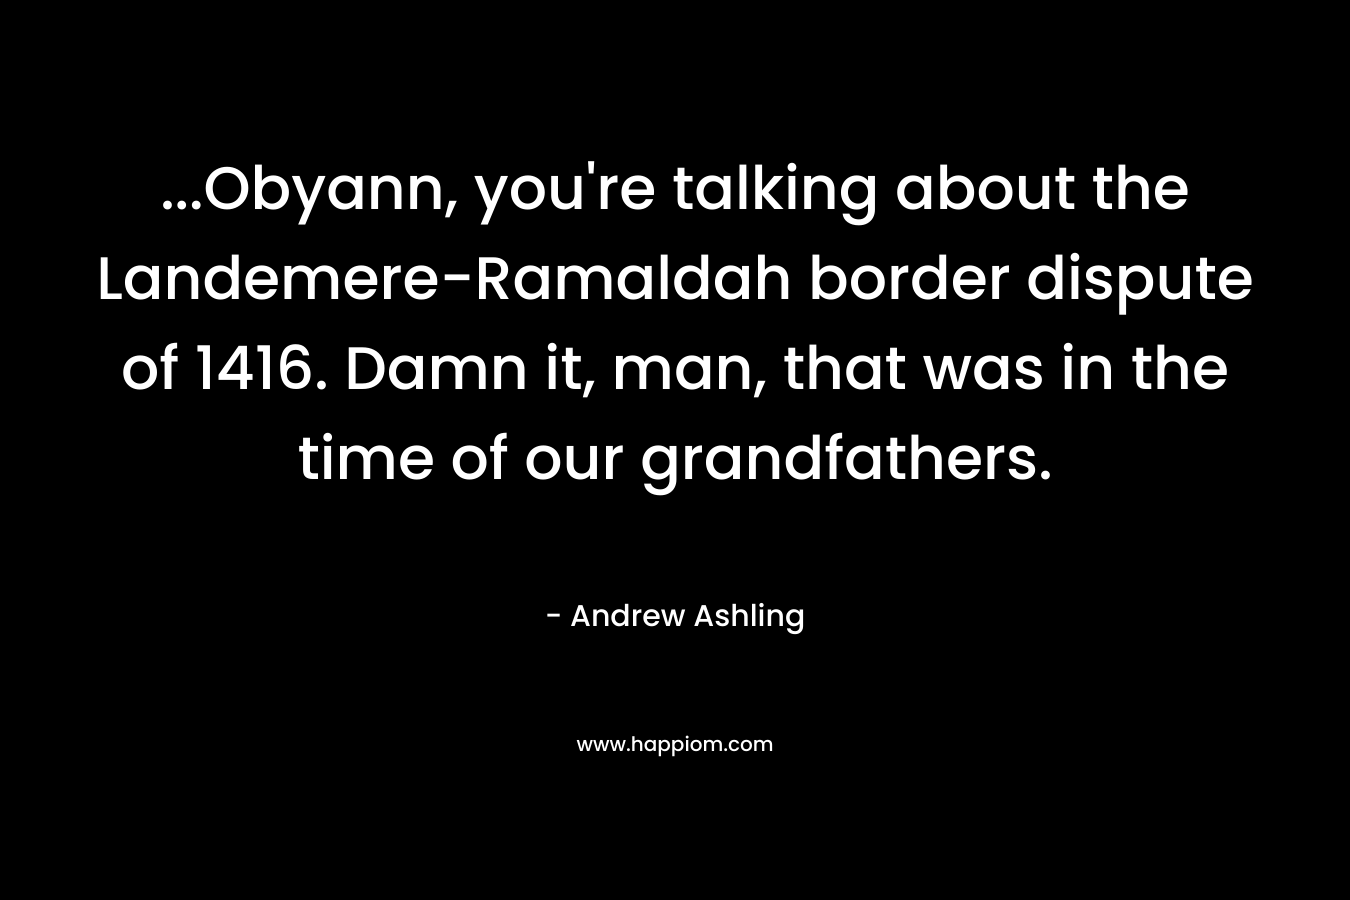 …Obyann, you’re talking about the Landemere-Ramaldah border dispute of 1416. Damn it, man, that was in the time of our grandfathers. – Andrew Ashling